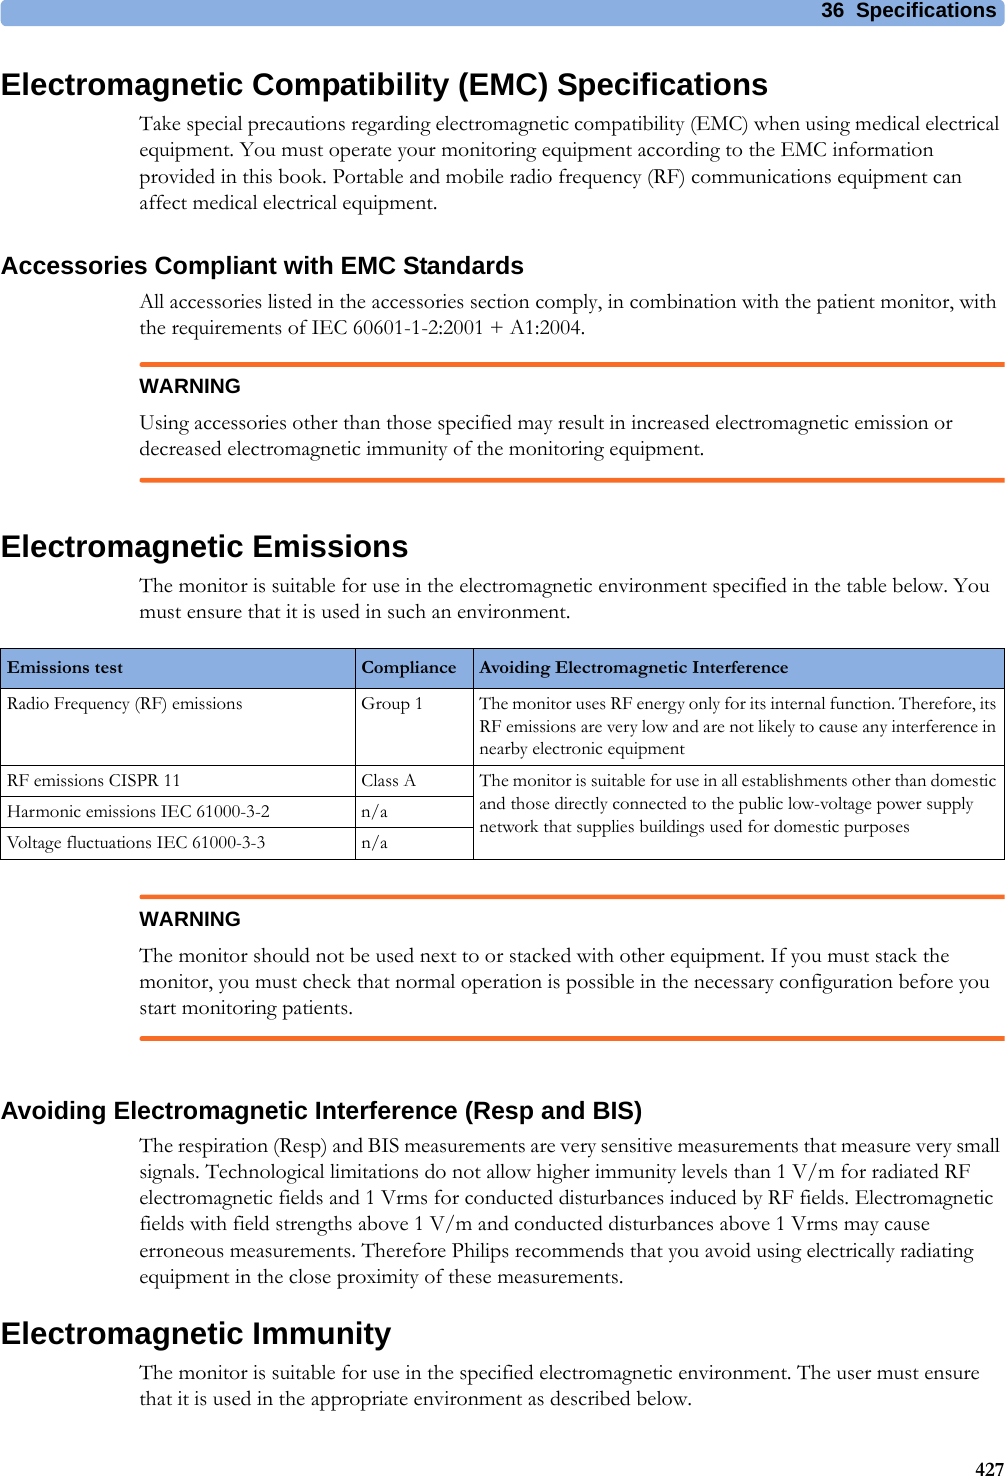 36 Specifications427Electromagnetic Compatibility (EMC) SpecificationsTake special precautions regarding electromagnetic compatibility (EMC) when using medical electrical equipment. You must operate your monitoring equipment according to the EMC information provided in this book. Portable and mobile radio frequency (RF) communications equipment can affect medical electrical equipment.Accessories Compliant with EMC StandardsAll accessories listed in the accessories section comply, in combination with the patient monitor, with the requirements of IEC 60601-1-2:2001 + A1:2004.WARNINGUsing accessories other than those specified may result in increased electromagnetic emission or decreased electromagnetic immunity of the monitoring equipment.Electromagnetic EmissionsThe monitor is suitable for use in the electromagnetic environment specified in the table below. You must ensure that it is used in such an environment.WARNINGThe monitor should not be used next to or stacked with other equipment. If you must stack the monitor, you must check that normal operation is possible in the necessary configuration before you start monitoring patients.Avoiding Electromagnetic Interference (Resp and BIS)The respiration (Resp) and BIS measurements are very sensitive measurements that measure very small signals. Technological limitations do not allow higher immunity levels than 1 V/m for radiated RF electromagnetic fields and 1 Vrms for conducted disturbances induced by RF fields. Electromagnetic fields with field strengths above 1 V/m and conducted disturbances above 1 Vrms may cause erroneous measurements. Therefore Philips recommends that you avoid using electrically radiating equipment in the close proximity of these measurements. Electromagnetic ImmunityThe monitor is suitable for use in the specified electromagnetic environment. The user must ensure that it is used in the appropriate environment as described below.Emissions test Compliance Avoiding Electromagnetic InterferenceRadio Frequency (RF) emissions Group 1 The monitor uses RF energy only for its internal function. Therefore, its RF emissions are very low and are not likely to cause any interference in nearby electronic equipmentRF emissions CISPR 11 Class A The monitor is suitable for use in all establishments other than domestic and those directly connected to the public low-voltage power supply network that supplies buildings used for domestic purposesHarmonic emissions IEC 61000-3-2 n/aVoltage fluctuations IEC 61000-3-3 n/a